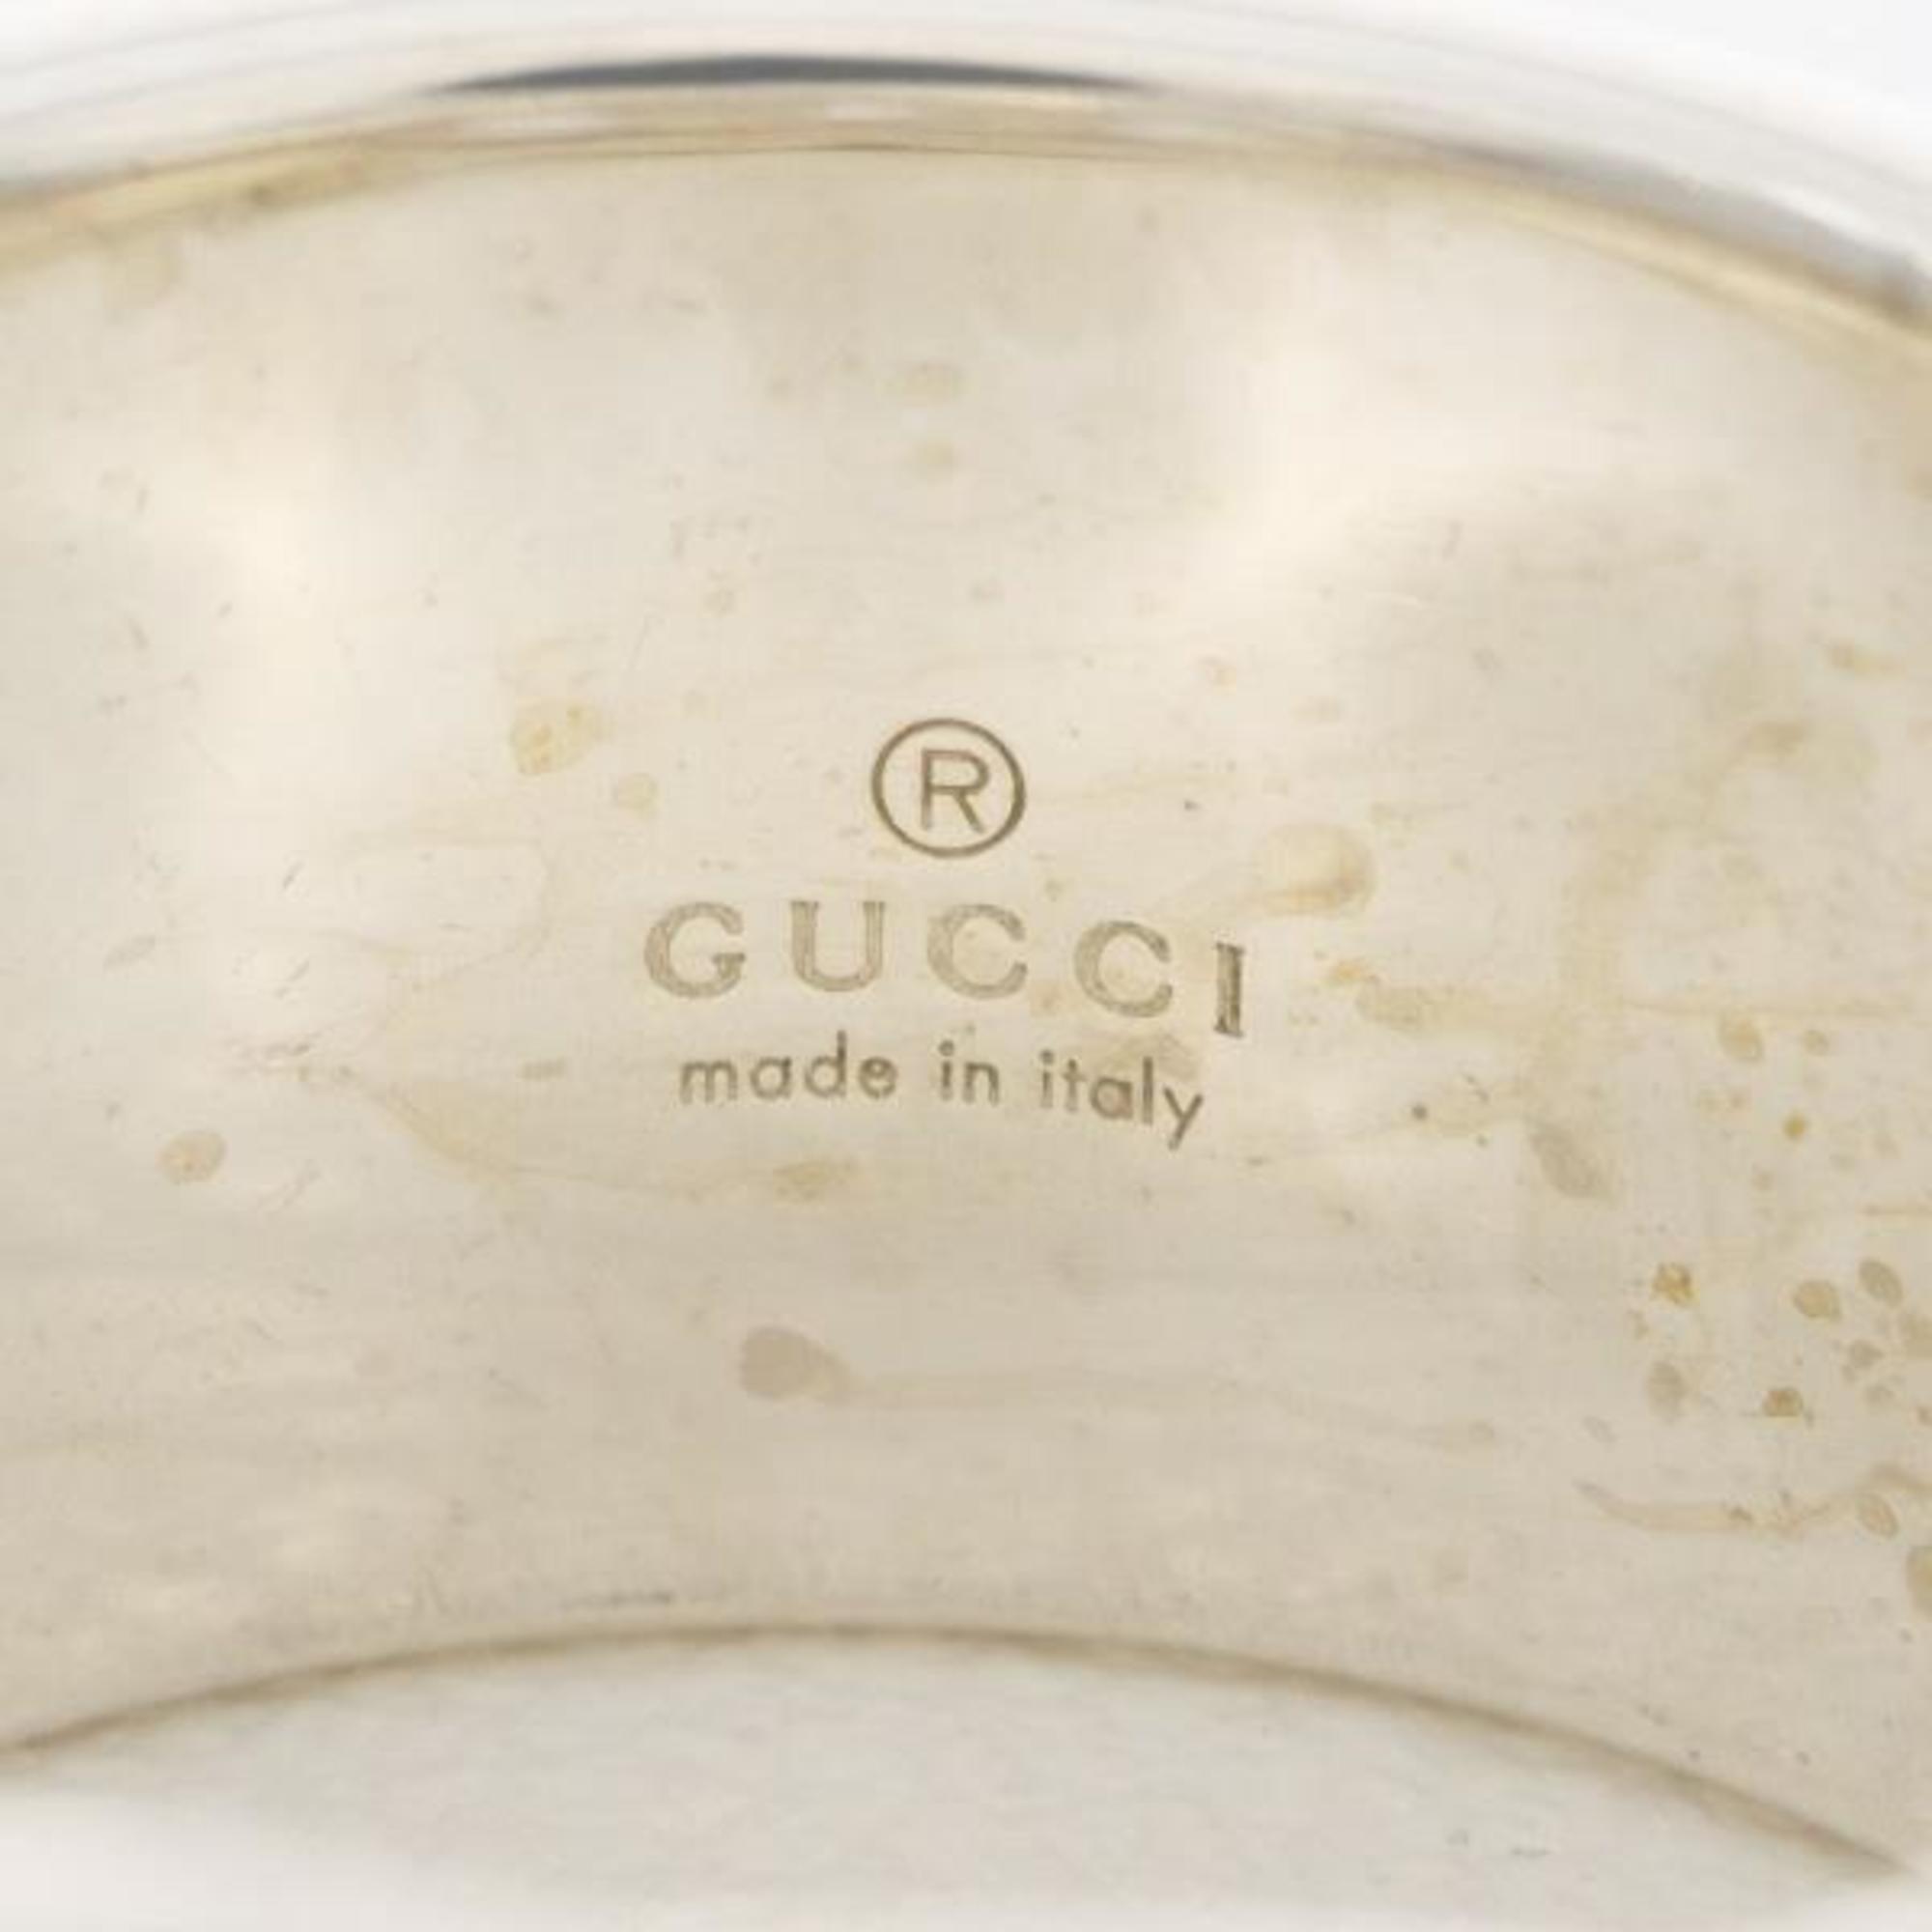 Gucci Interlocking G Silver Ring Size 12 Total Weight Approx. 9.6g Jewelry Wrapping Free